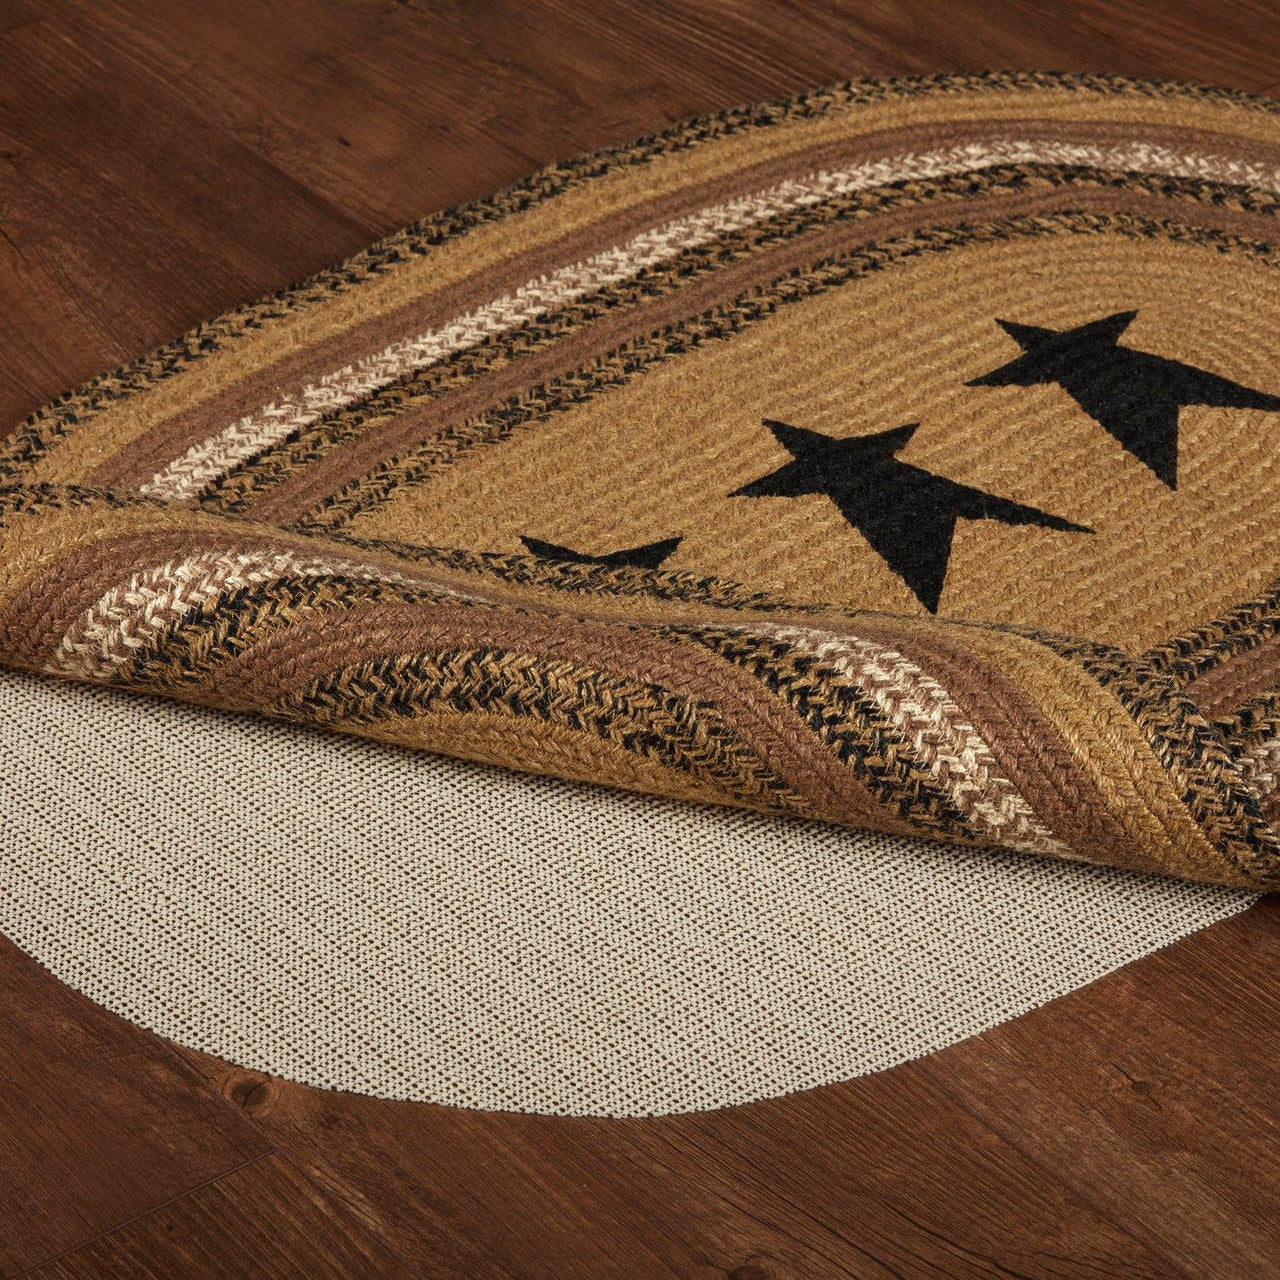 Kettle Grove Jute Braided Rug Oval Stencil Stars 24"x36" with Rug Pad VHC Brands - The Fox Decor